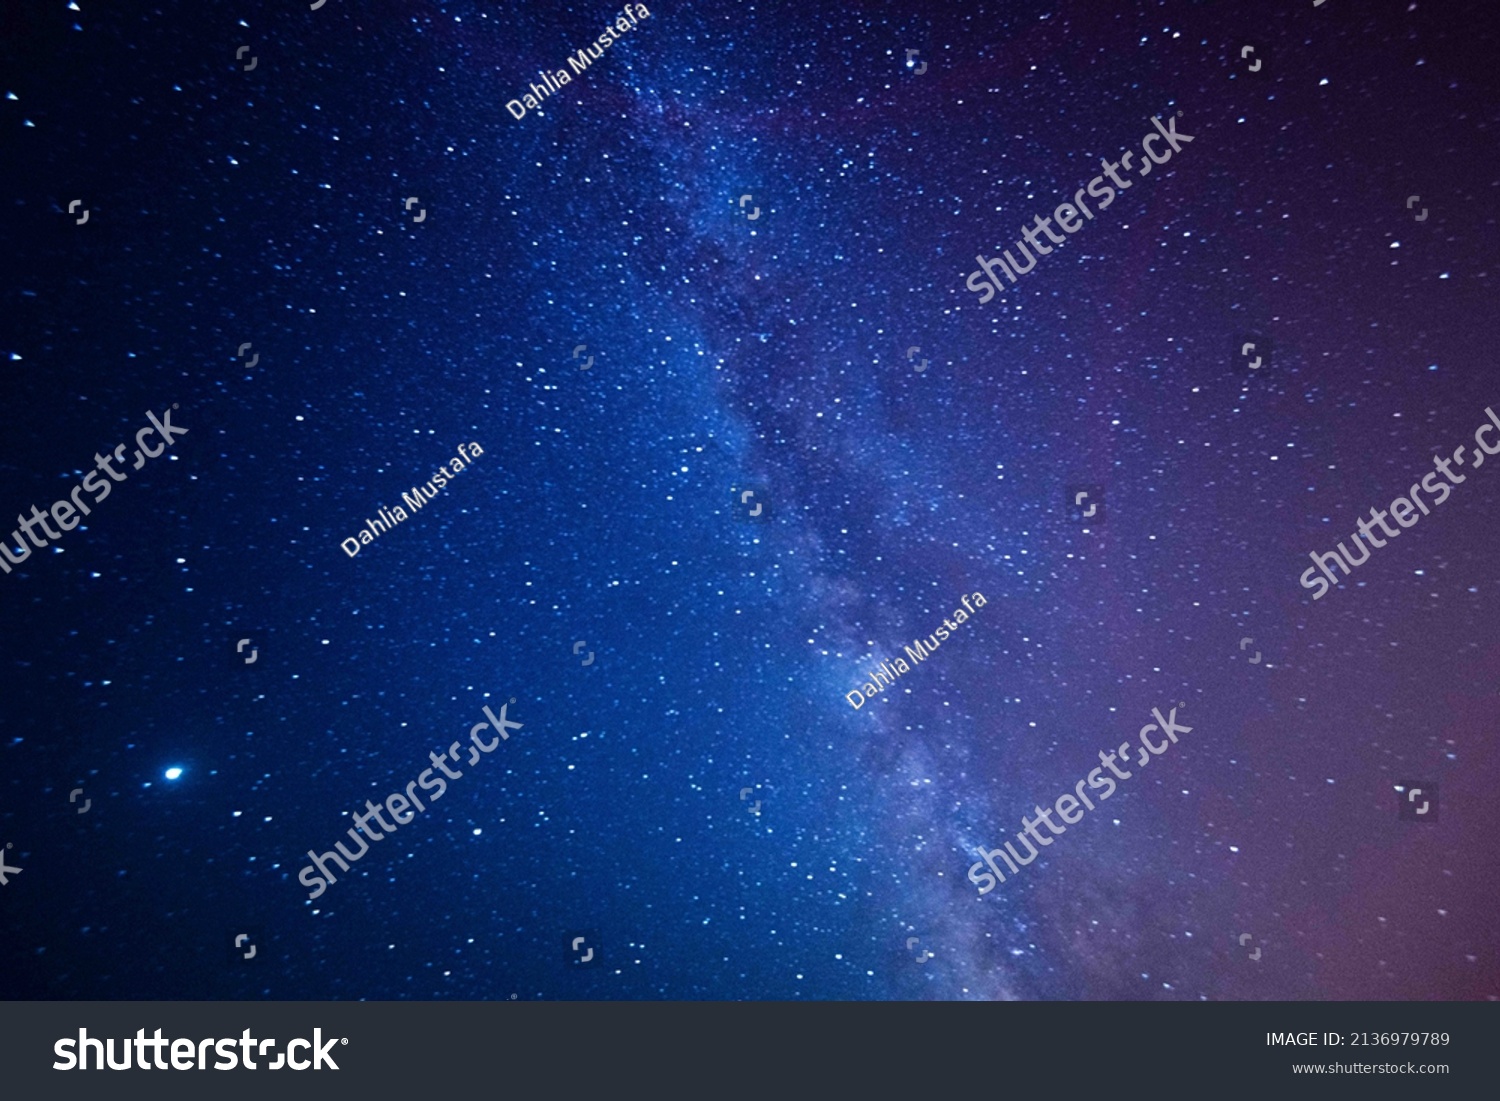 Astro photography in a desert nightscape with milky way galaxy. The background is stary celestial bodies in astronomy.
 #2136979789